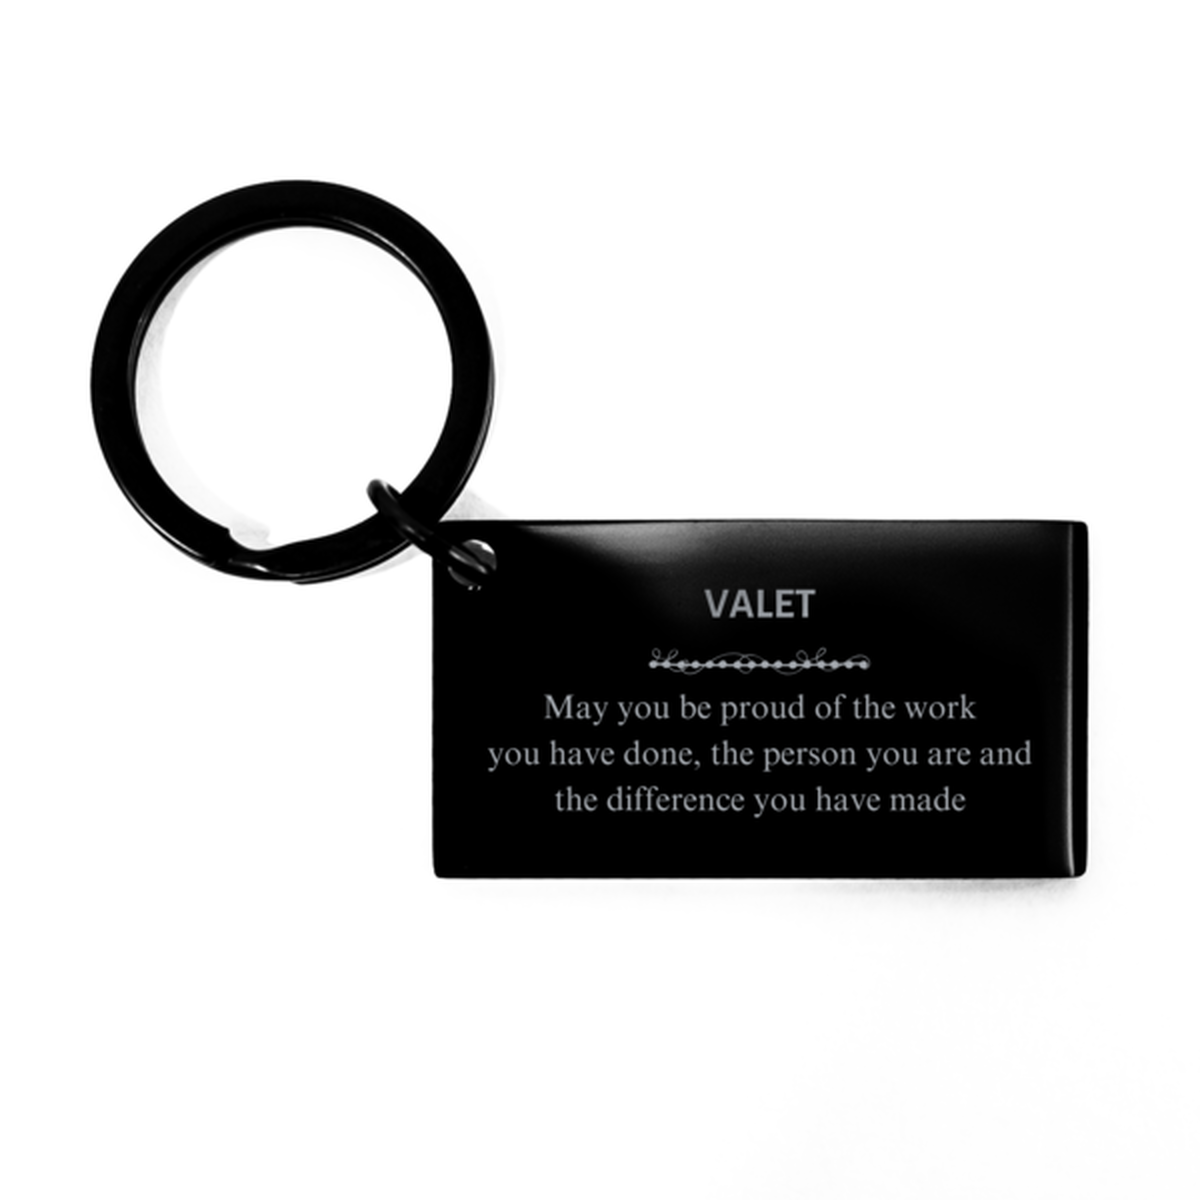 Agent May you be proud of the work you have done, Retirement Valet Keychain for Colleague Appreciation Gifts Amazing for Valet